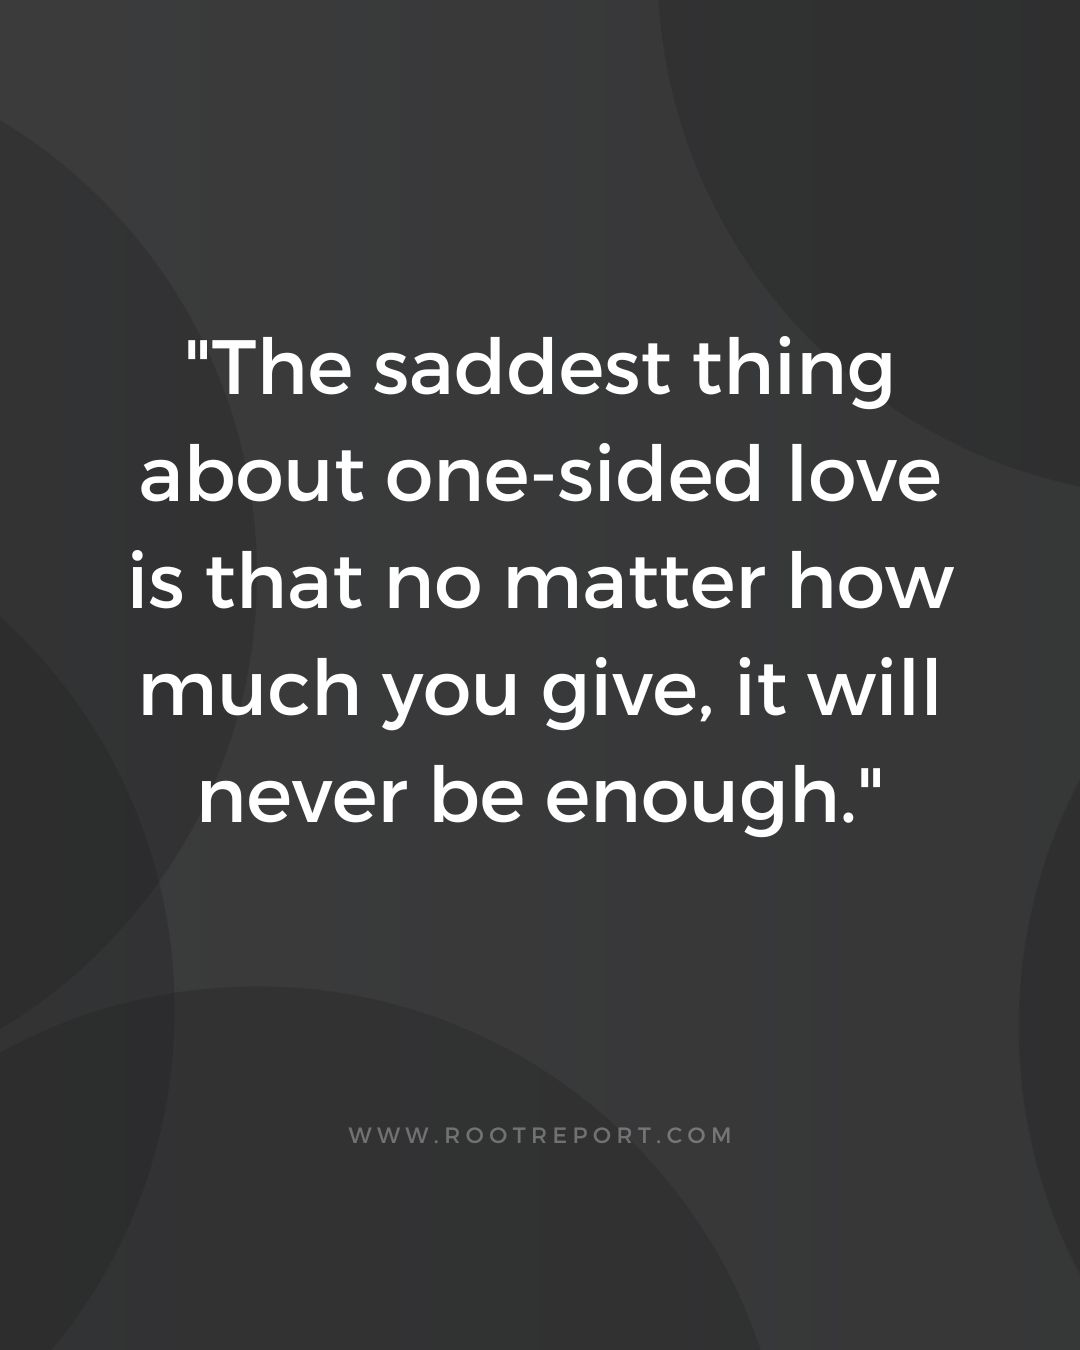 75+ One Sided Love Quotes and Captions [With Images]